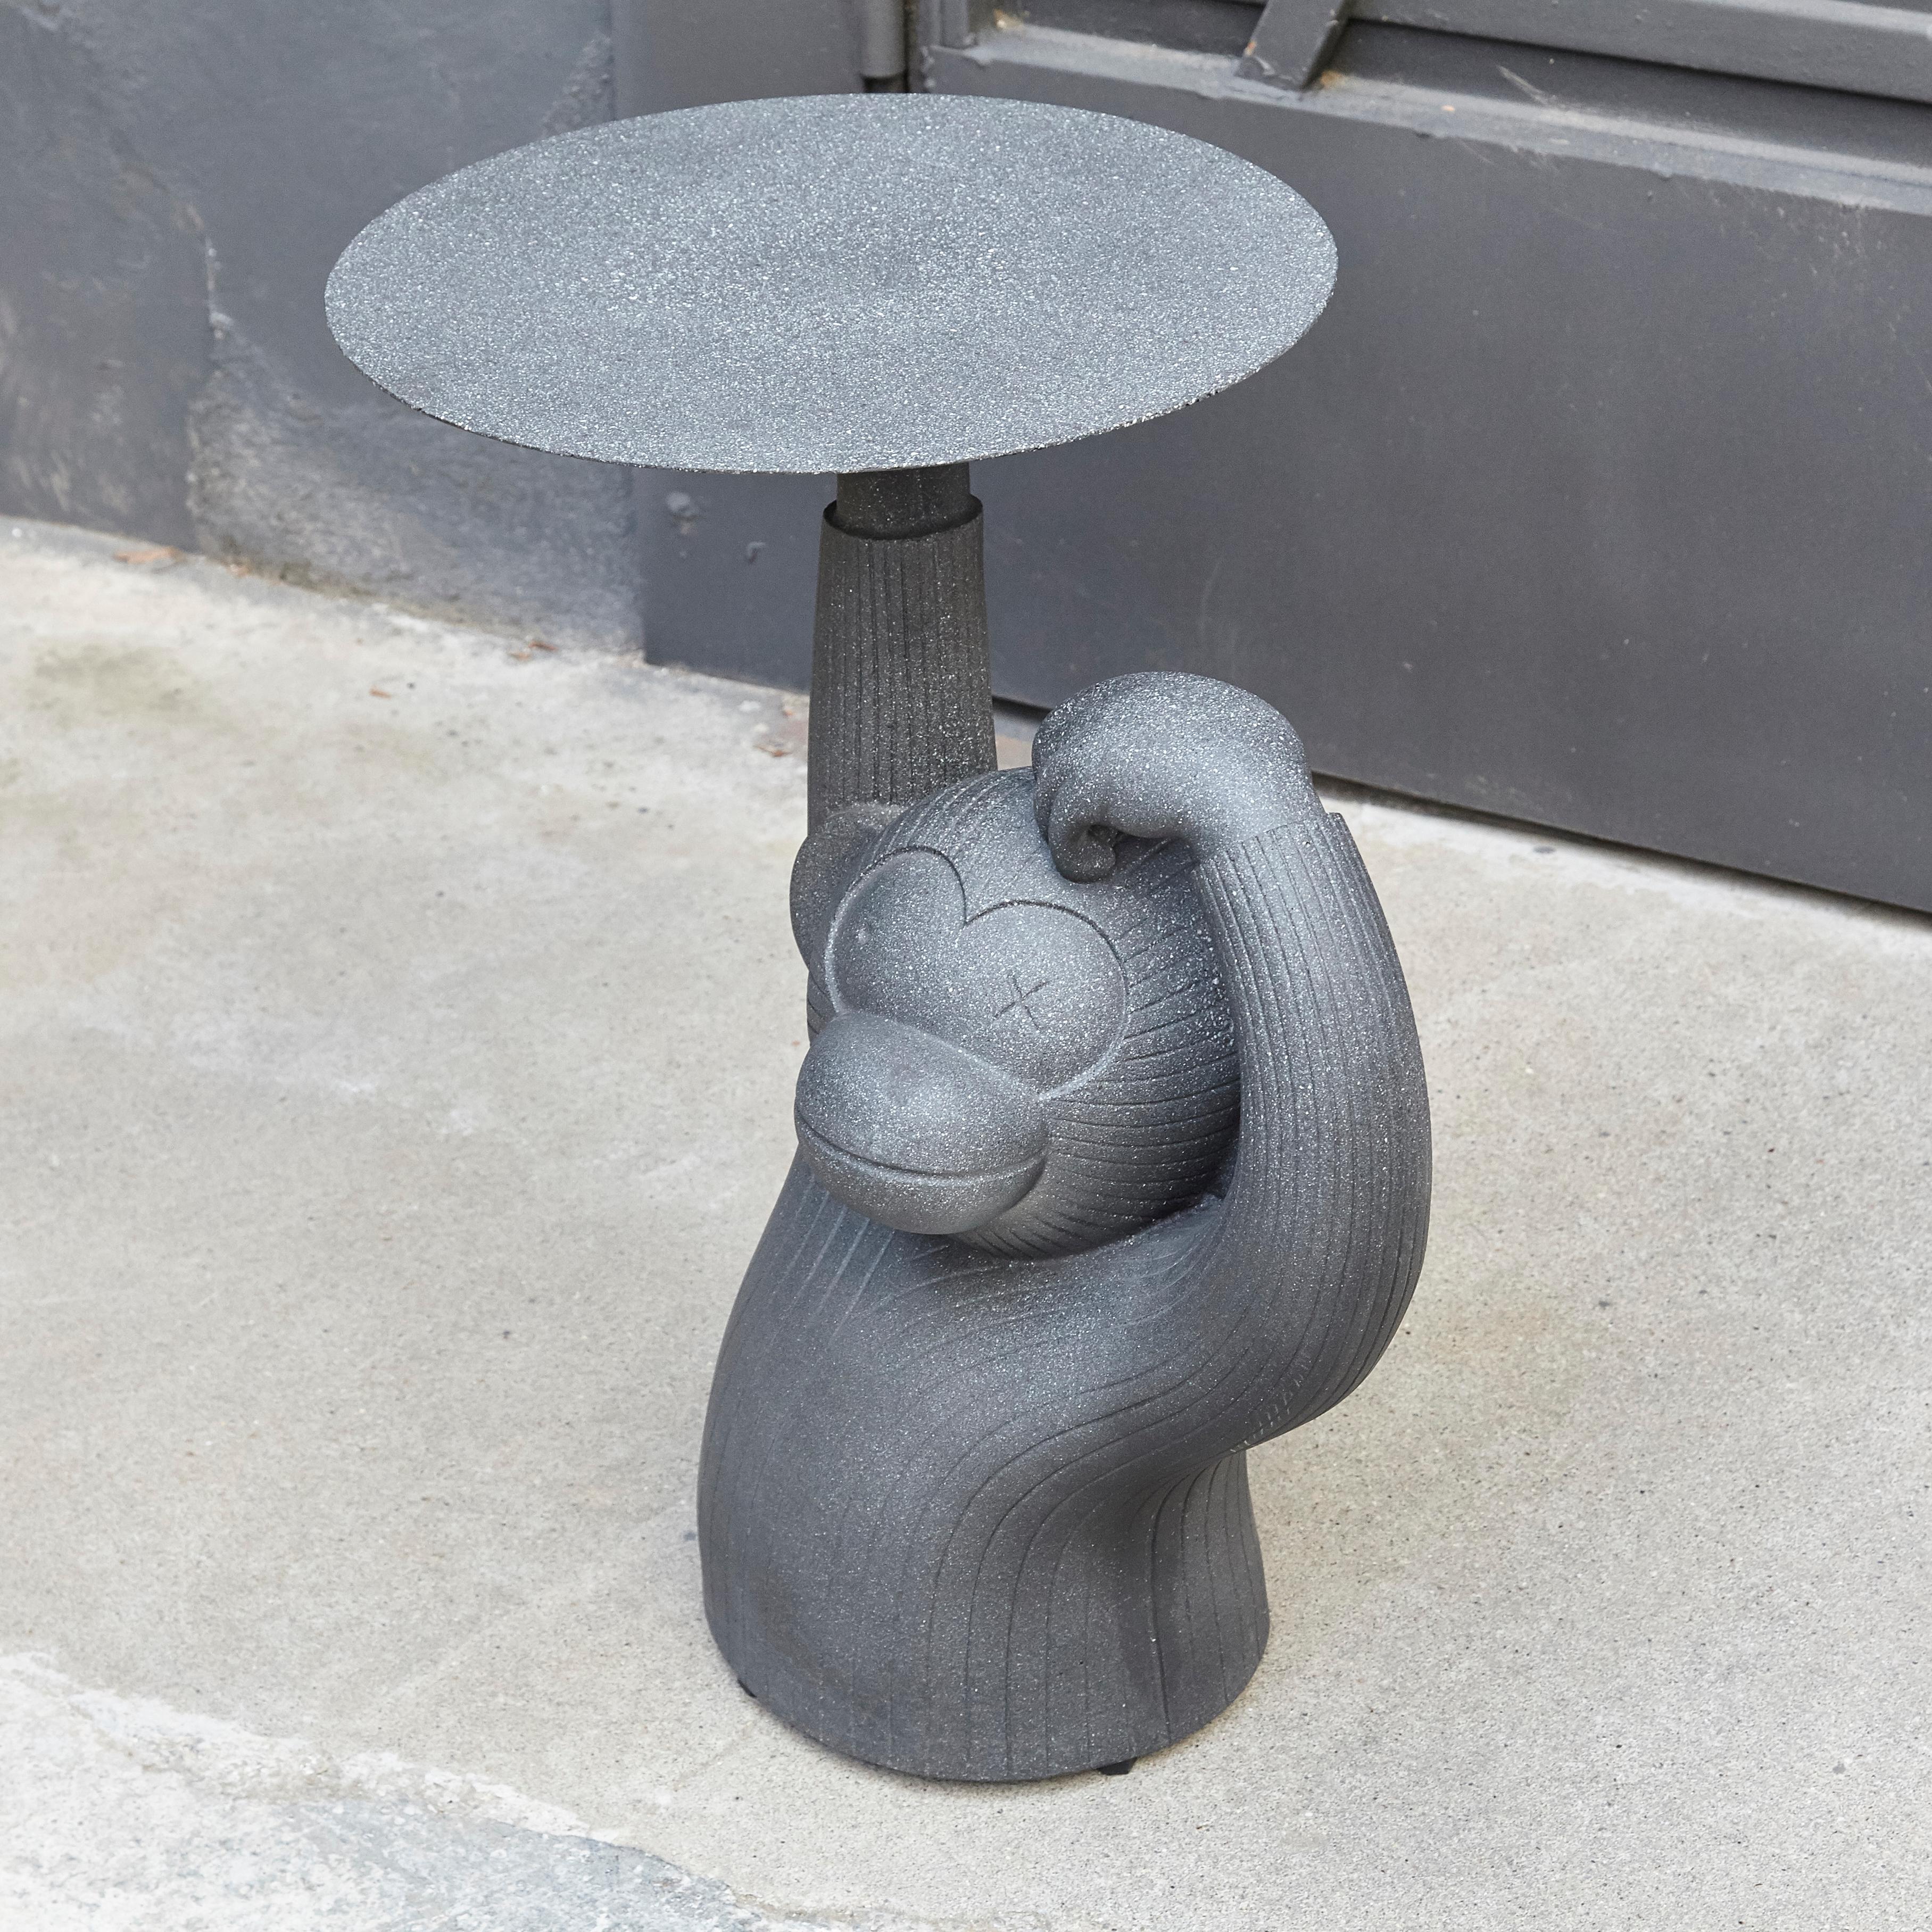 Monkey side table. Design by Jaime Hayon, 2016
Manufactured by BD Barcelona

Side table in one solid architectural concrete in grey/black. 
Includes regulatory glides.
  